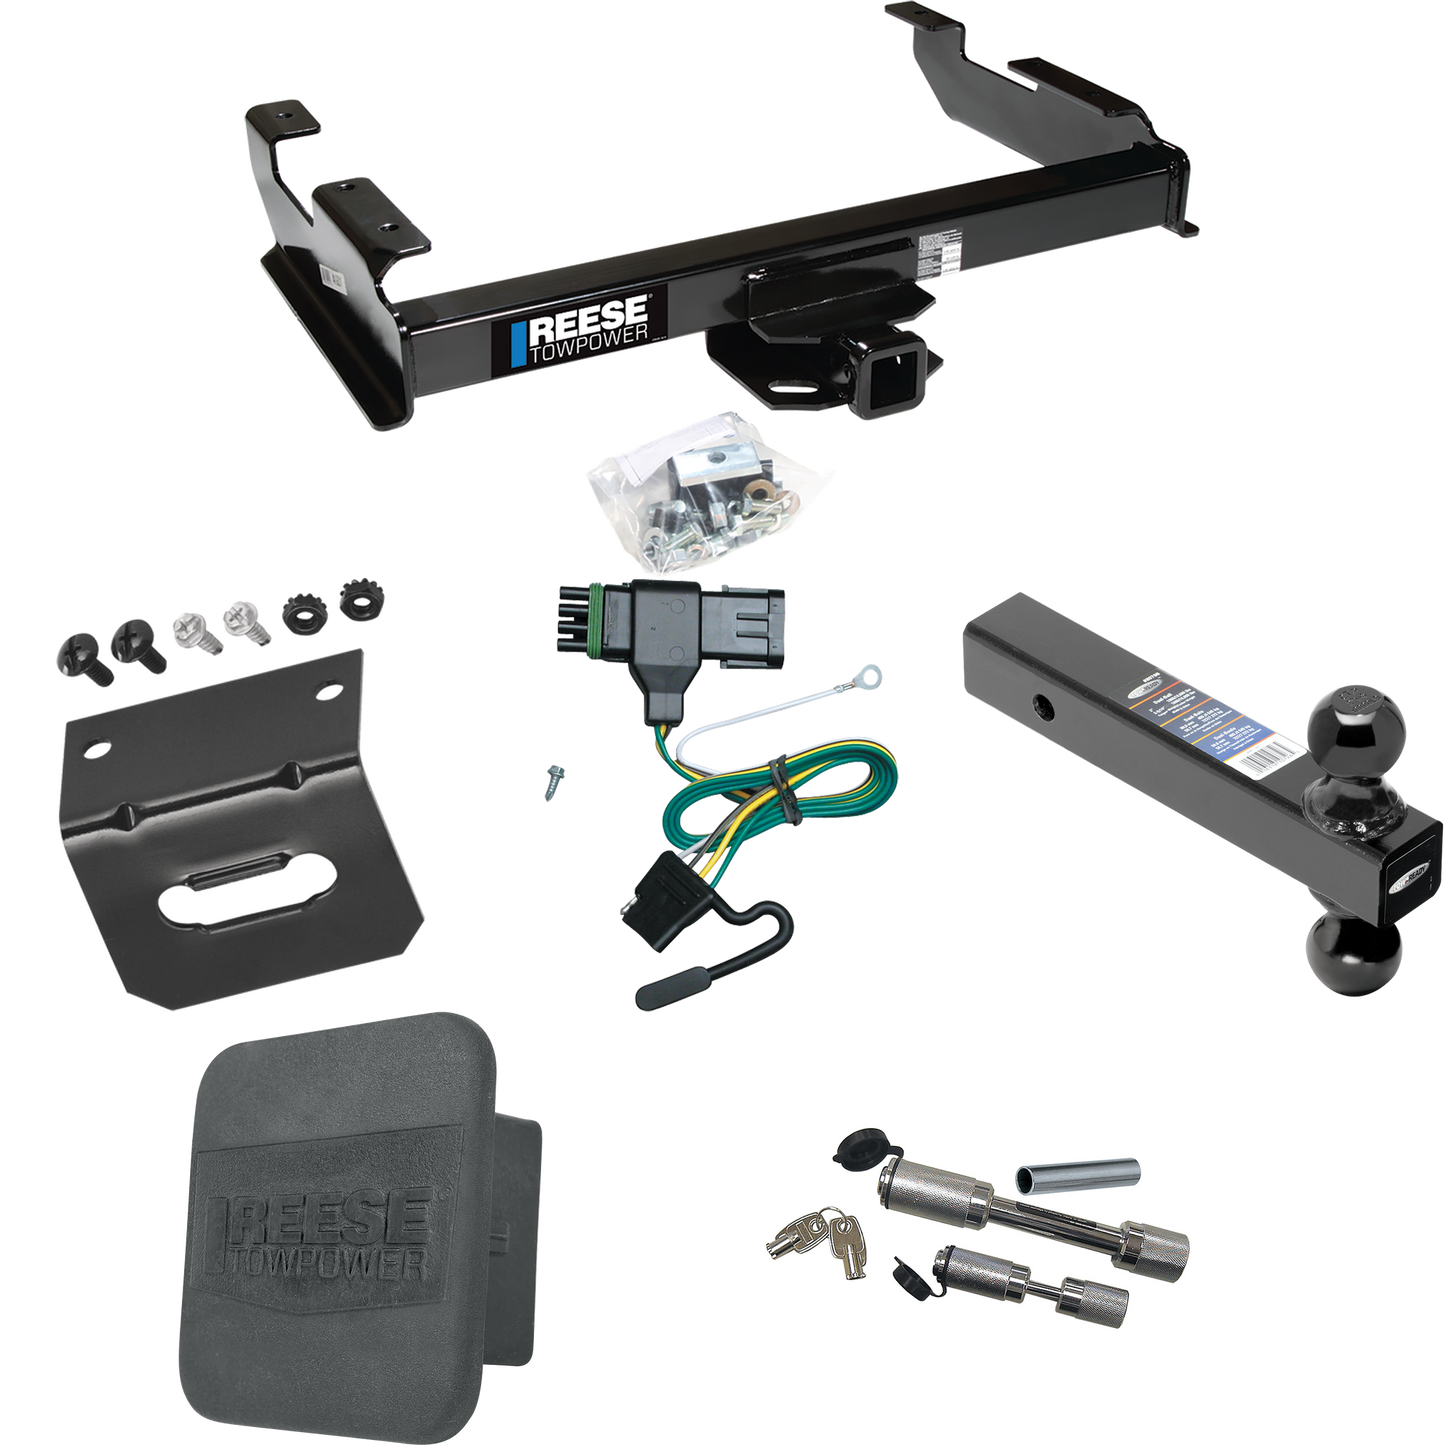 Fits 1992-2000 Chevrolet K3500 Trailer Hitch Tow PKG w/ 4-Flat Wiring Harness + Dual Ball Ball Mount 2" & 2-5/16" Trailer Balls + Dual Hitch & Coupler Locks + Hitch Cover + Wiring Bracket (For Crew Cab Models) By Reese Towpower